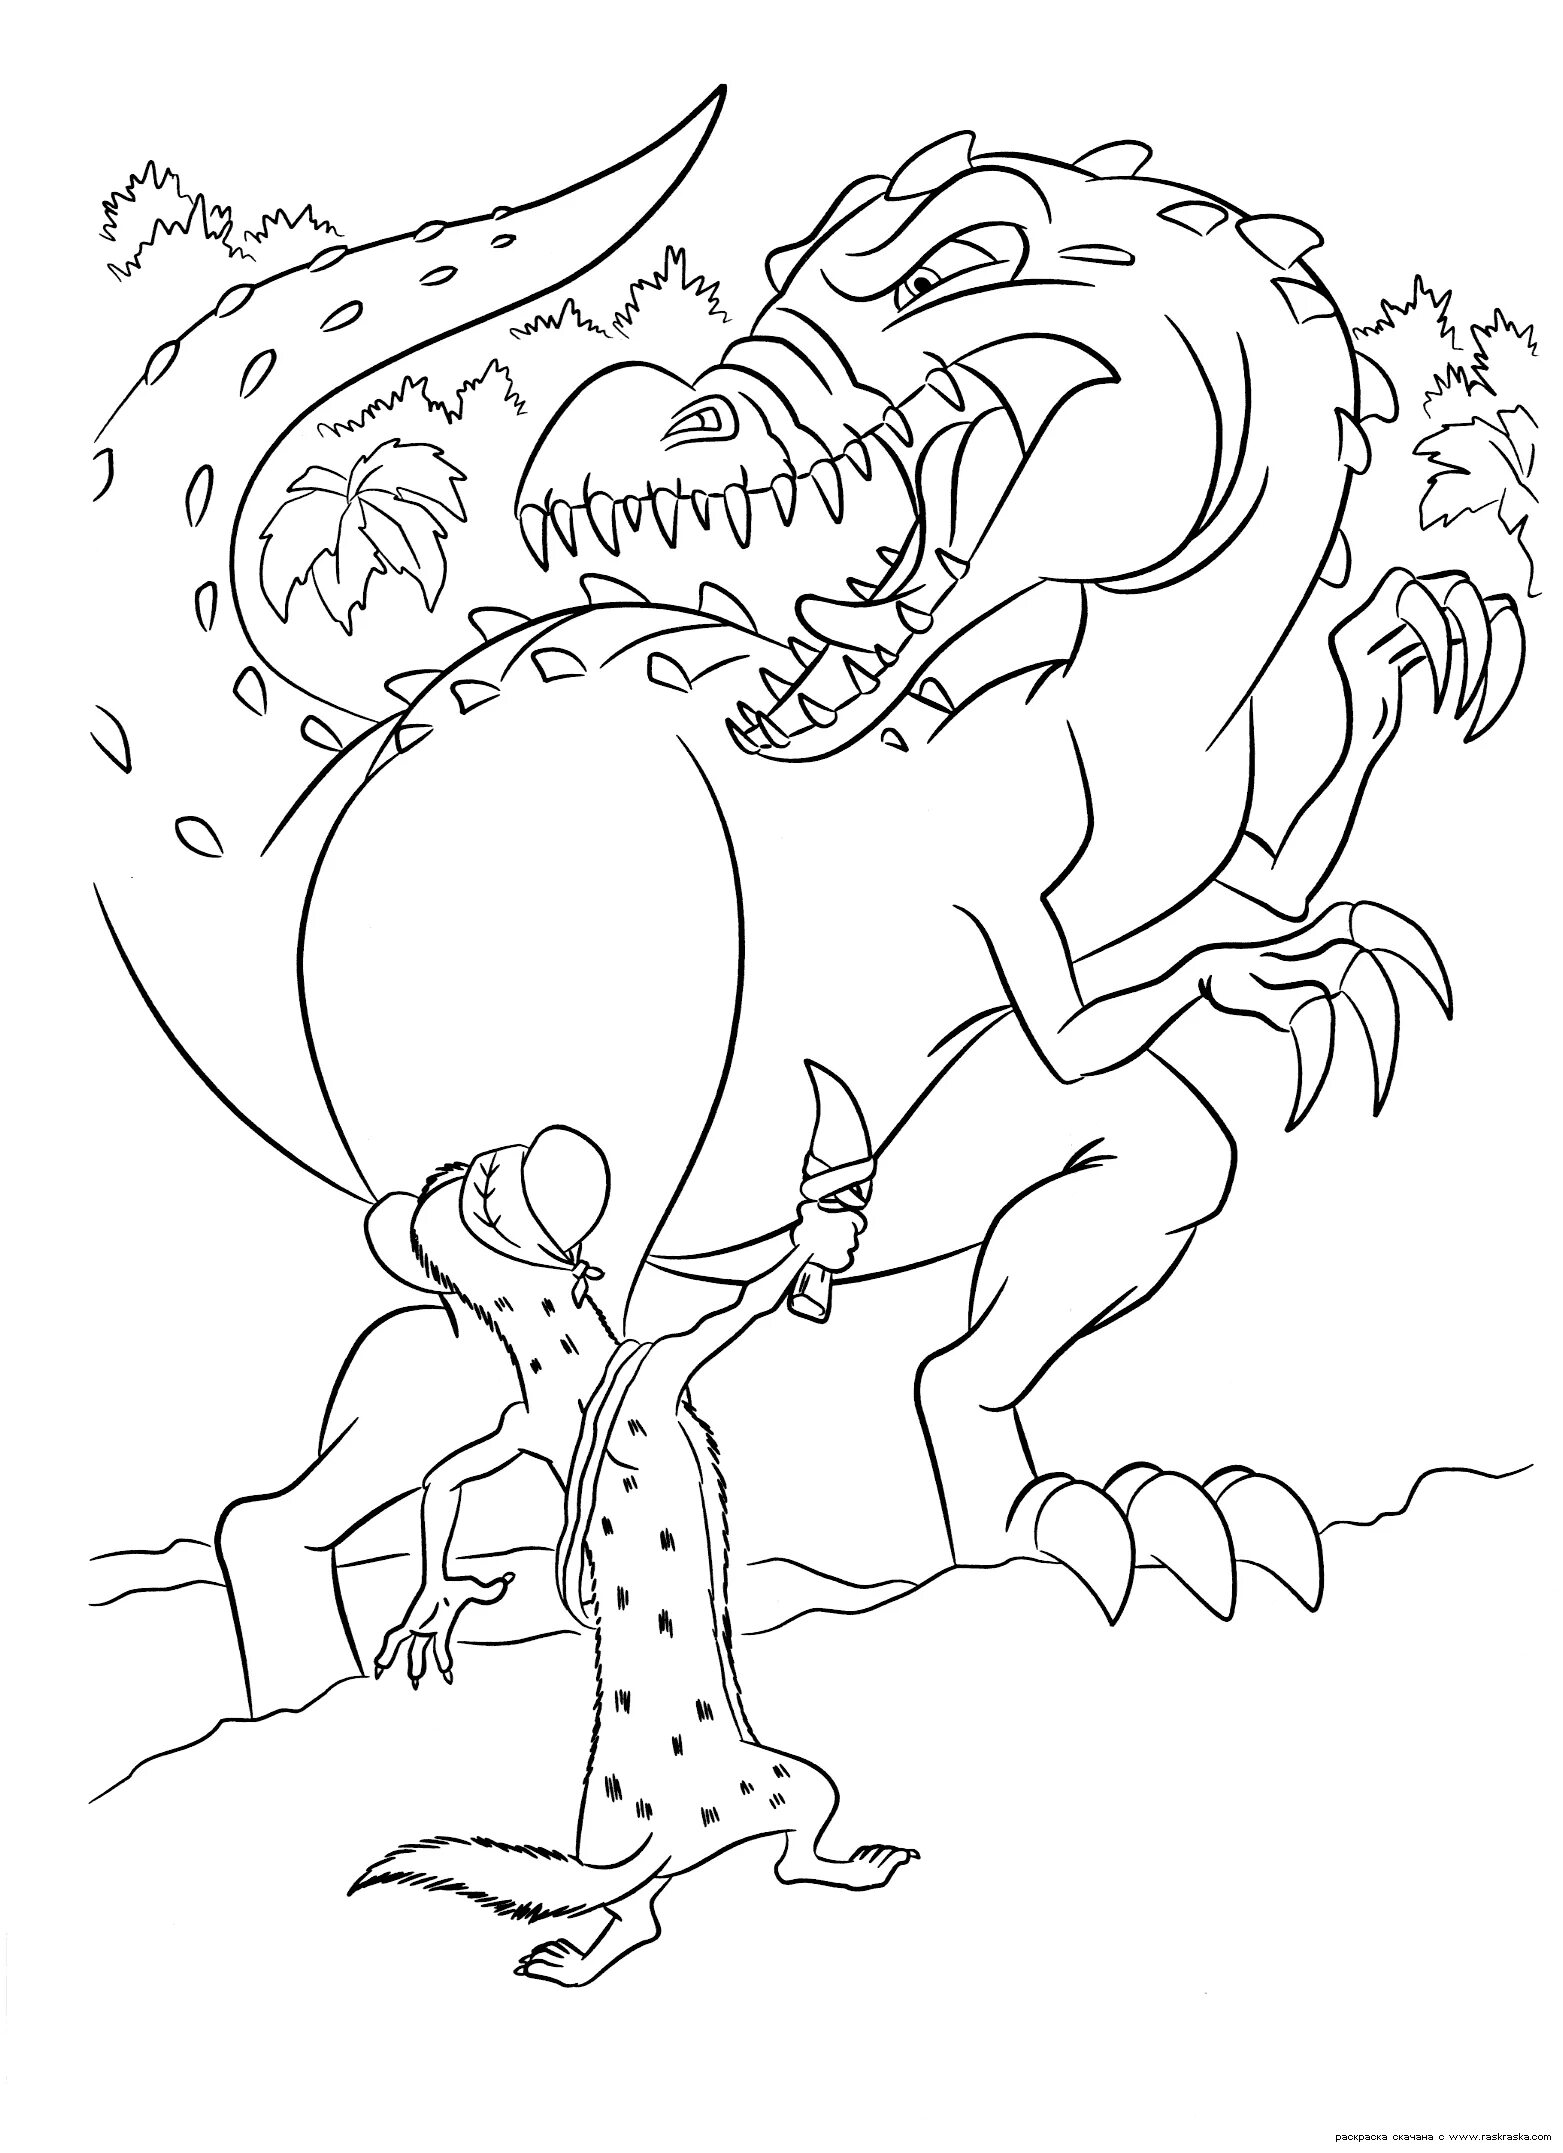 Deluxe Ice Age 3 coloring page